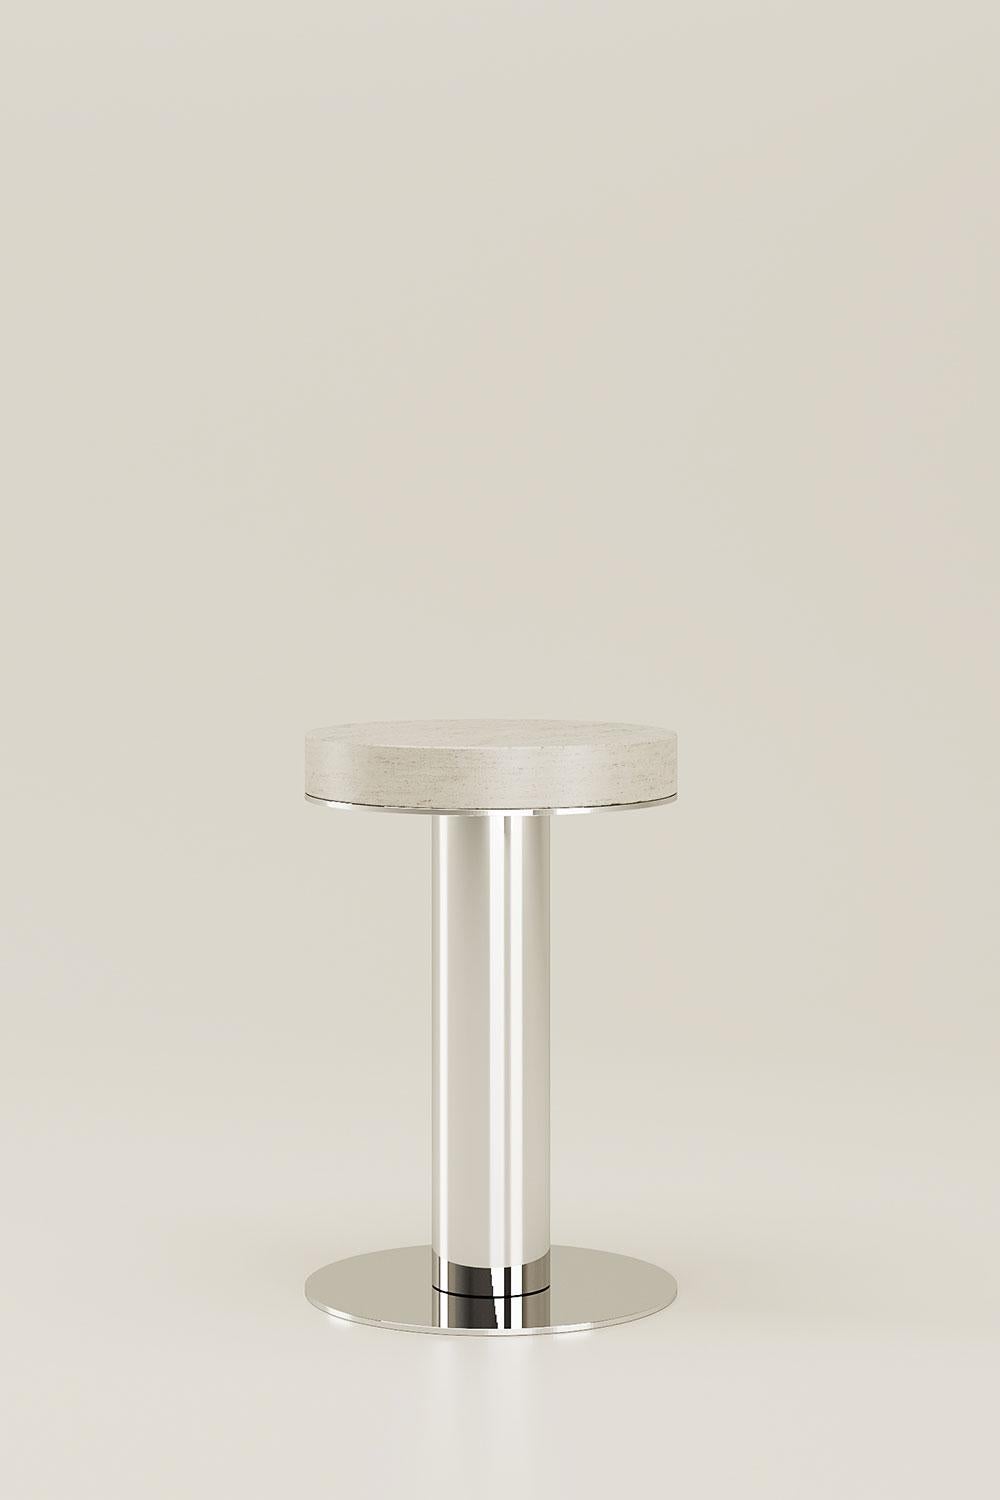 Travertine Nail Side Table by Andrea Bonini
Limited Edition
Dimensions: Ø 35 x H 60 cm.
Materials: Travertine marble and polished steel. 

Made in Italy. Limited series, numbered and signed pieces. Custom size or finish on request.  Also available